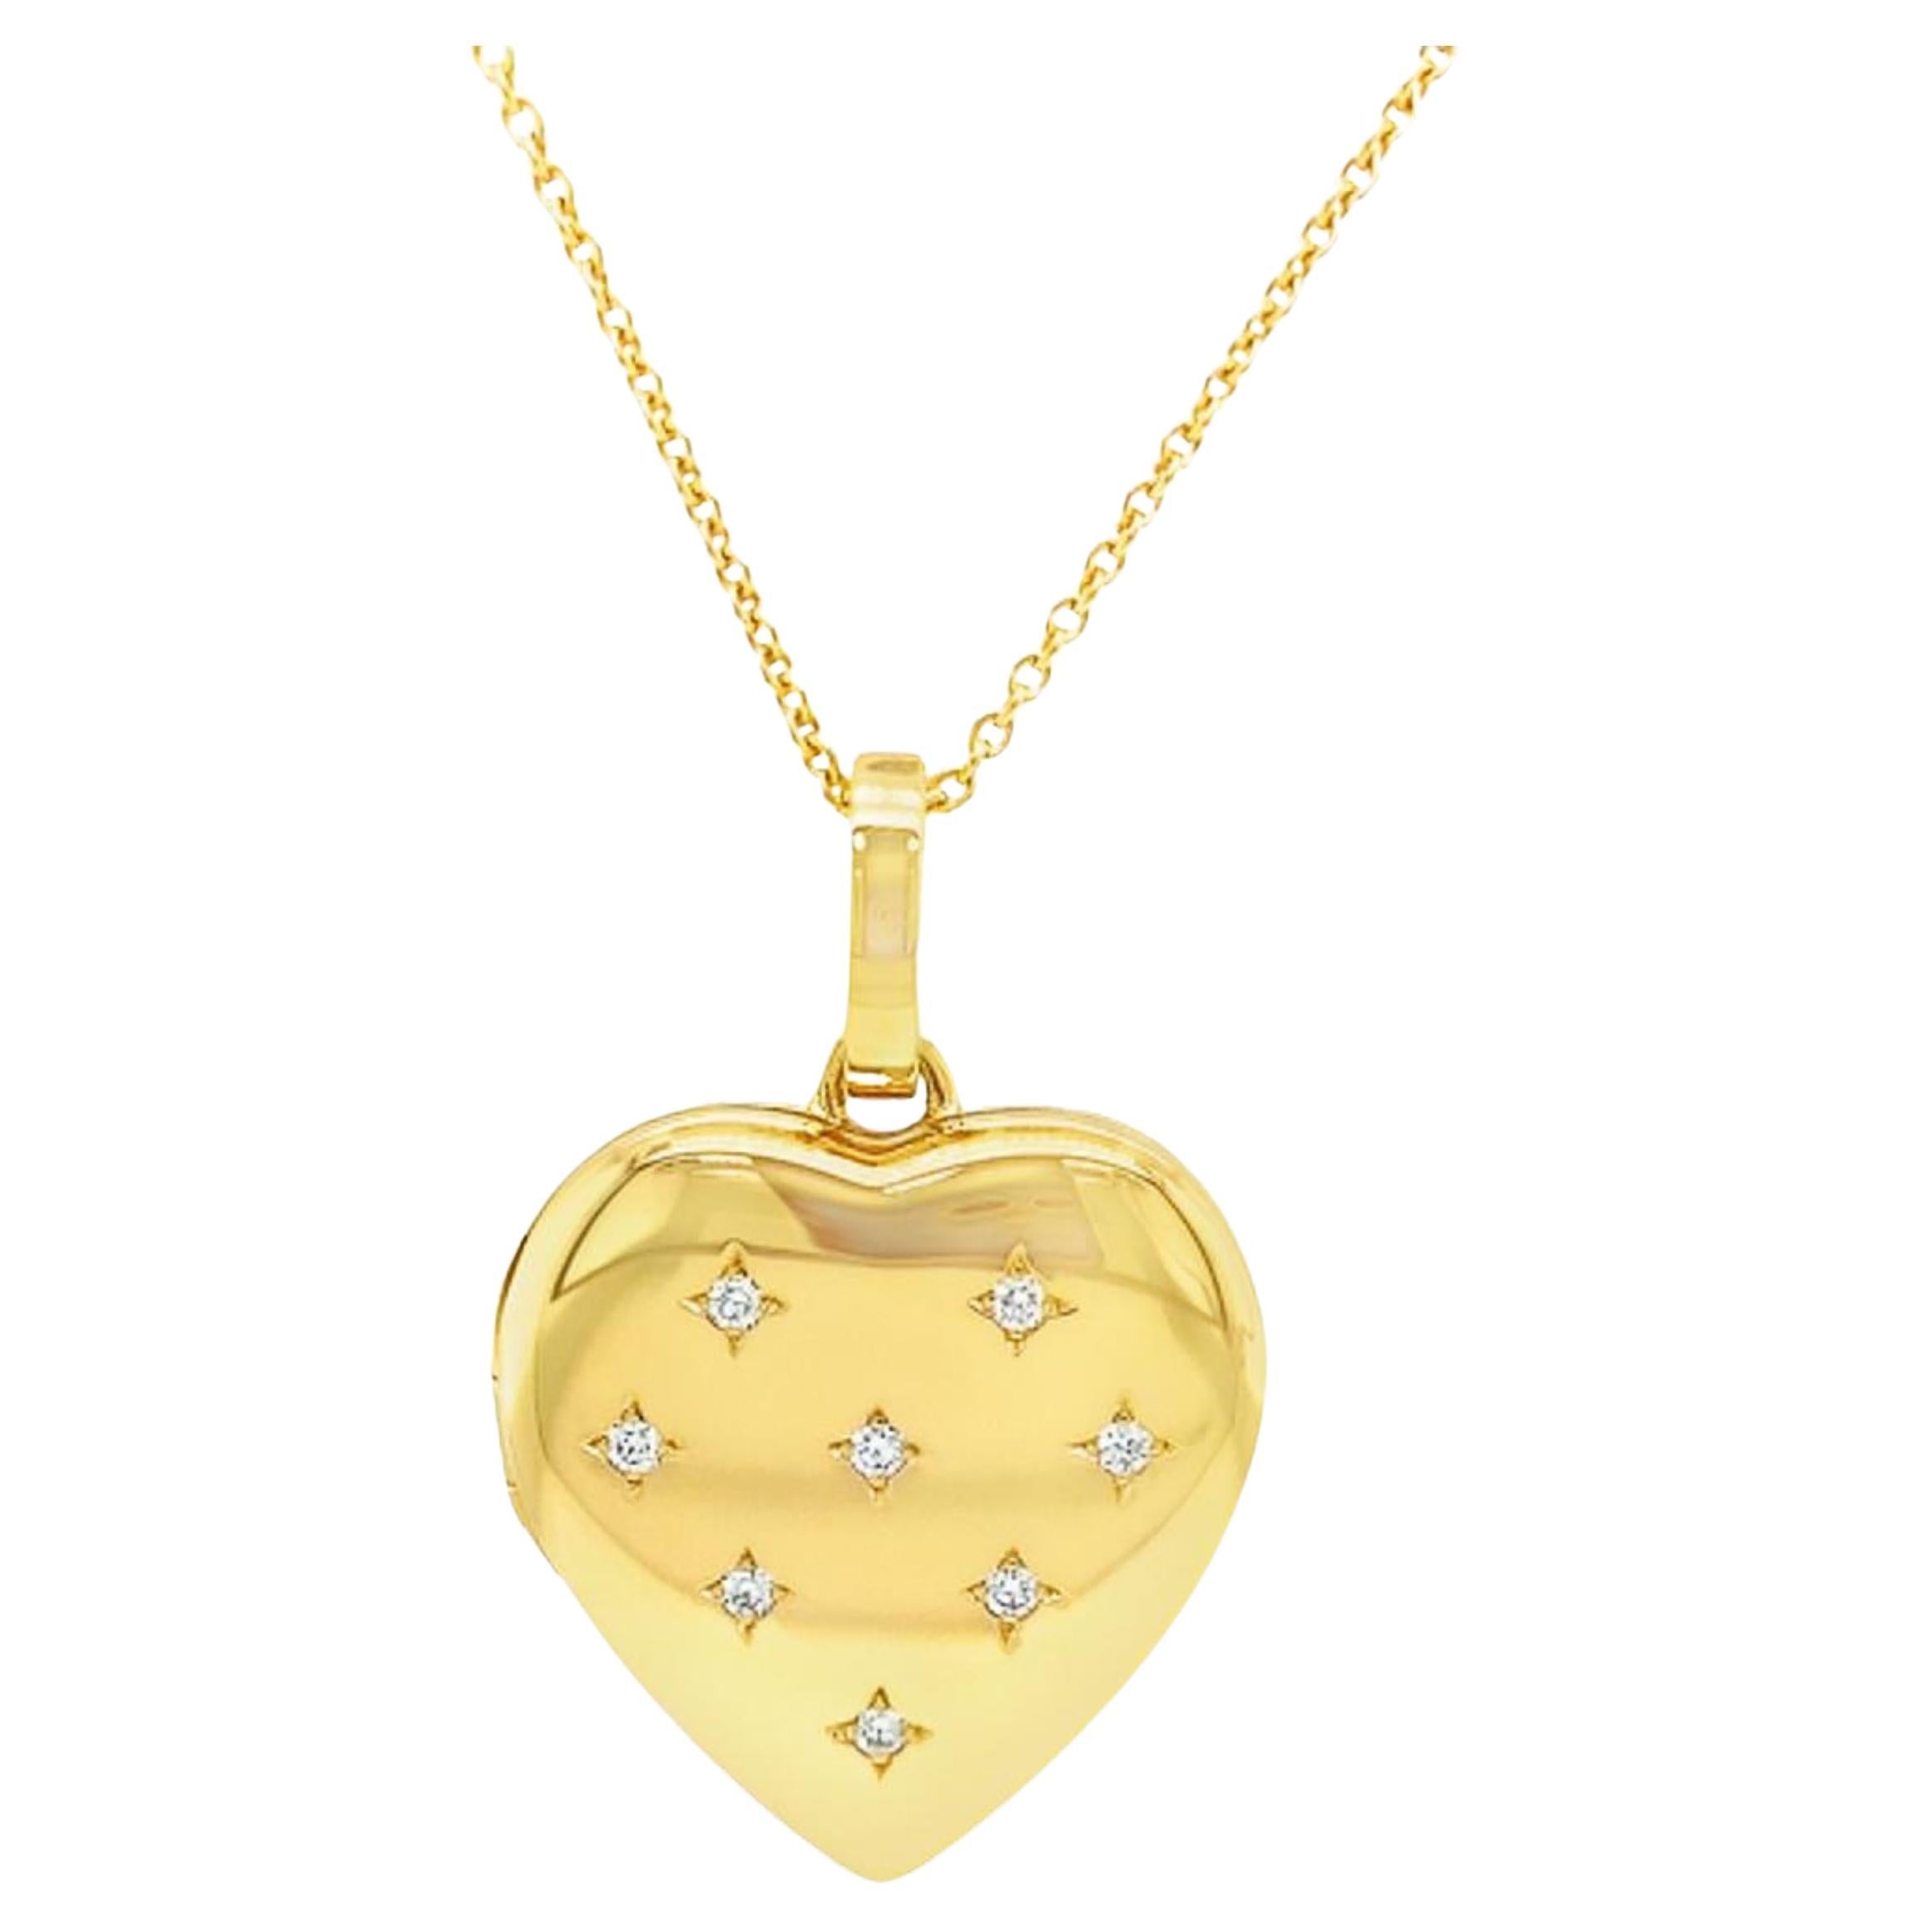 Heart Shaped Locket Pendant Necklace, 18k Yellow Gold, 8 Diamonds 0.16ct For Sale